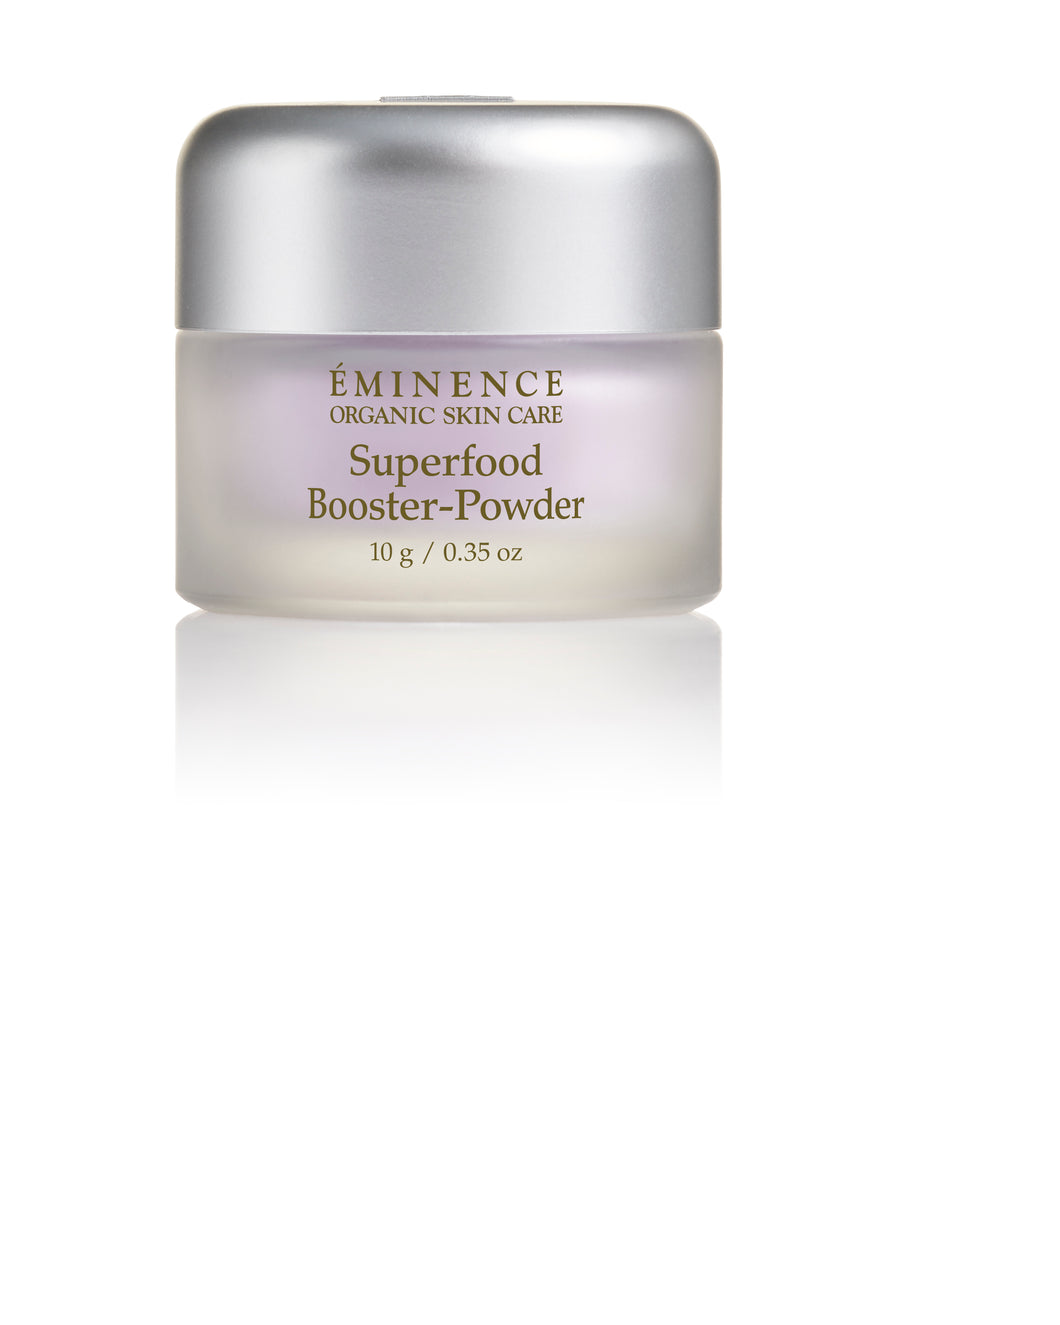 Eminence Superfood Booster Powder